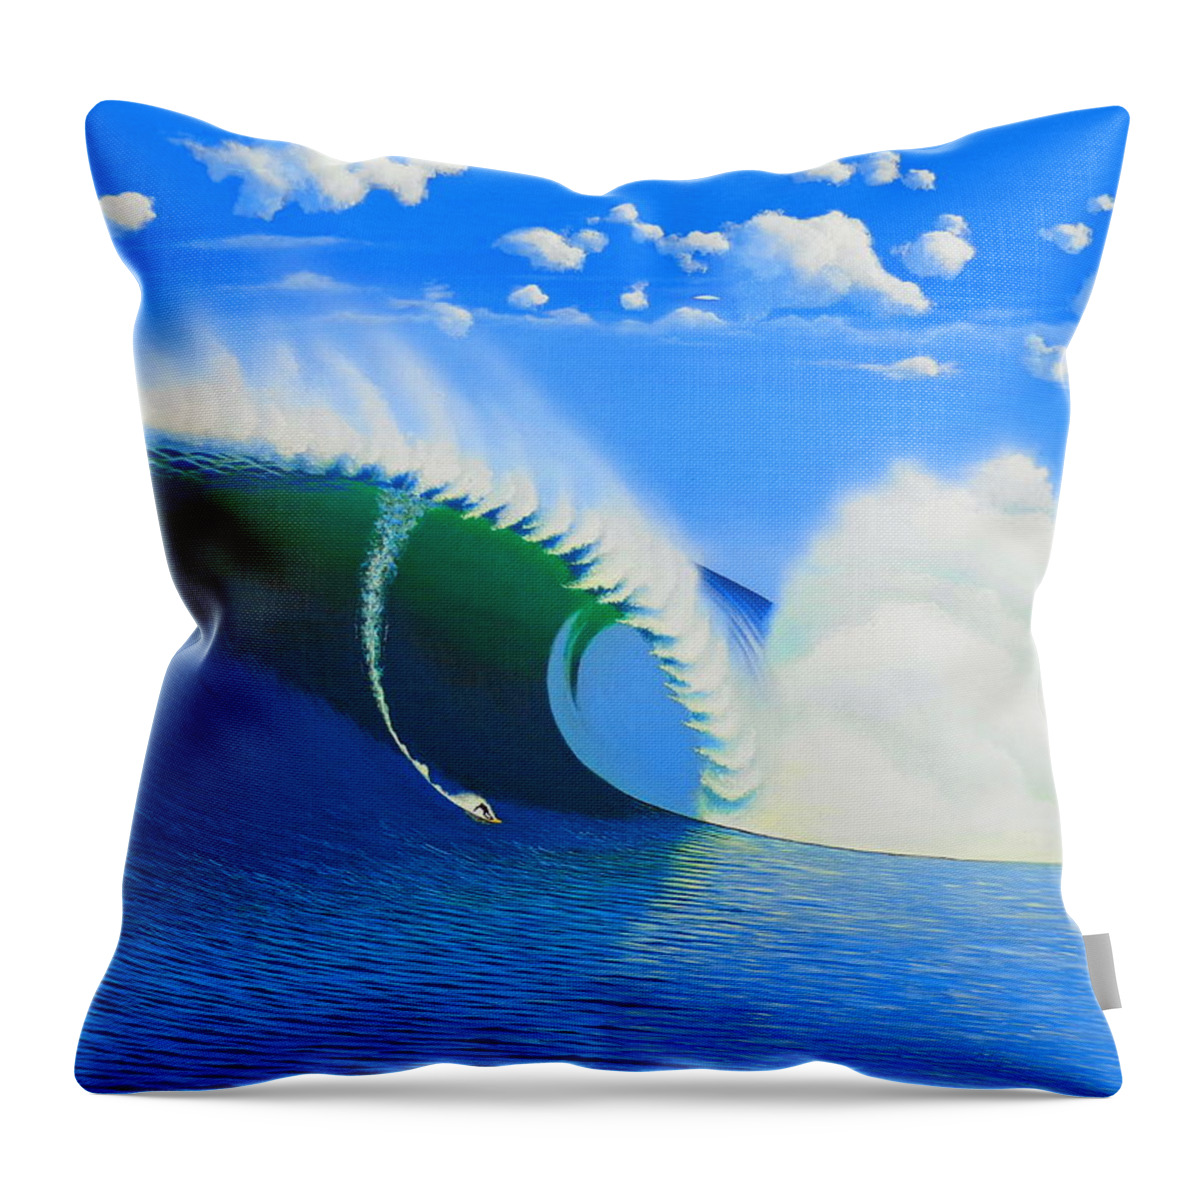 Surfing Throw Pillow featuring the painting Cortes 100-Foot Barrel by John Kaelin